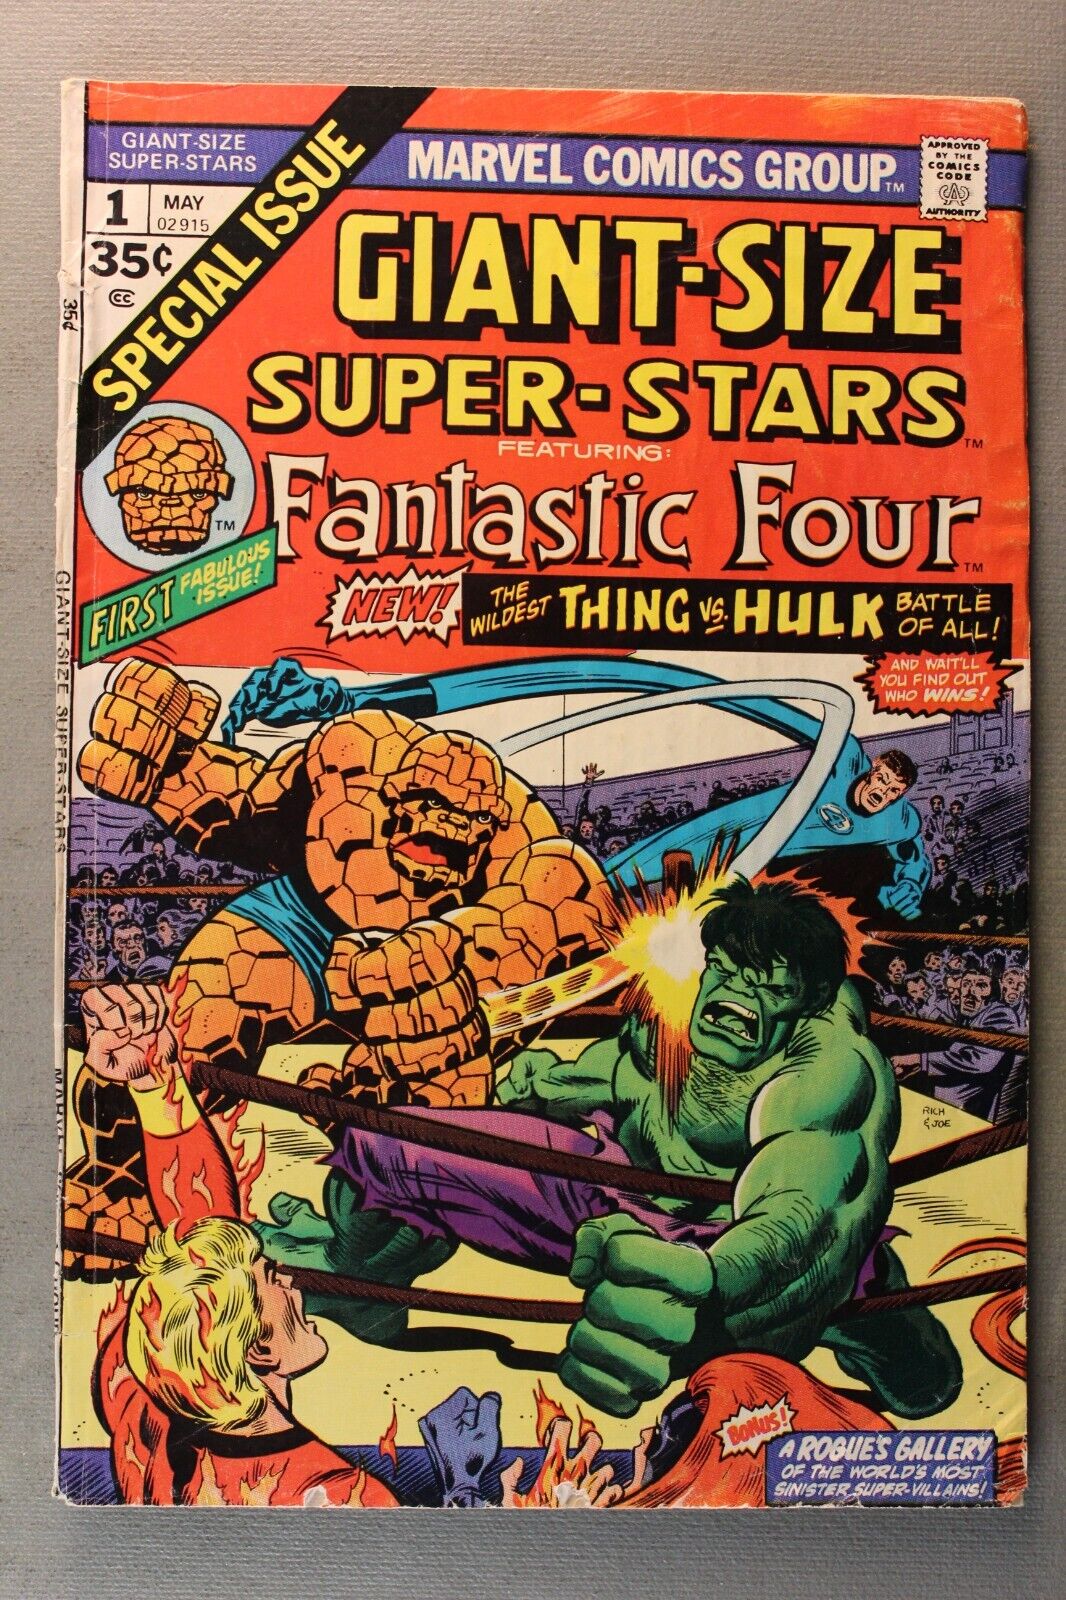 GIANT-SIZE SUPER-STARS #1 Featuring Fantastic Four \